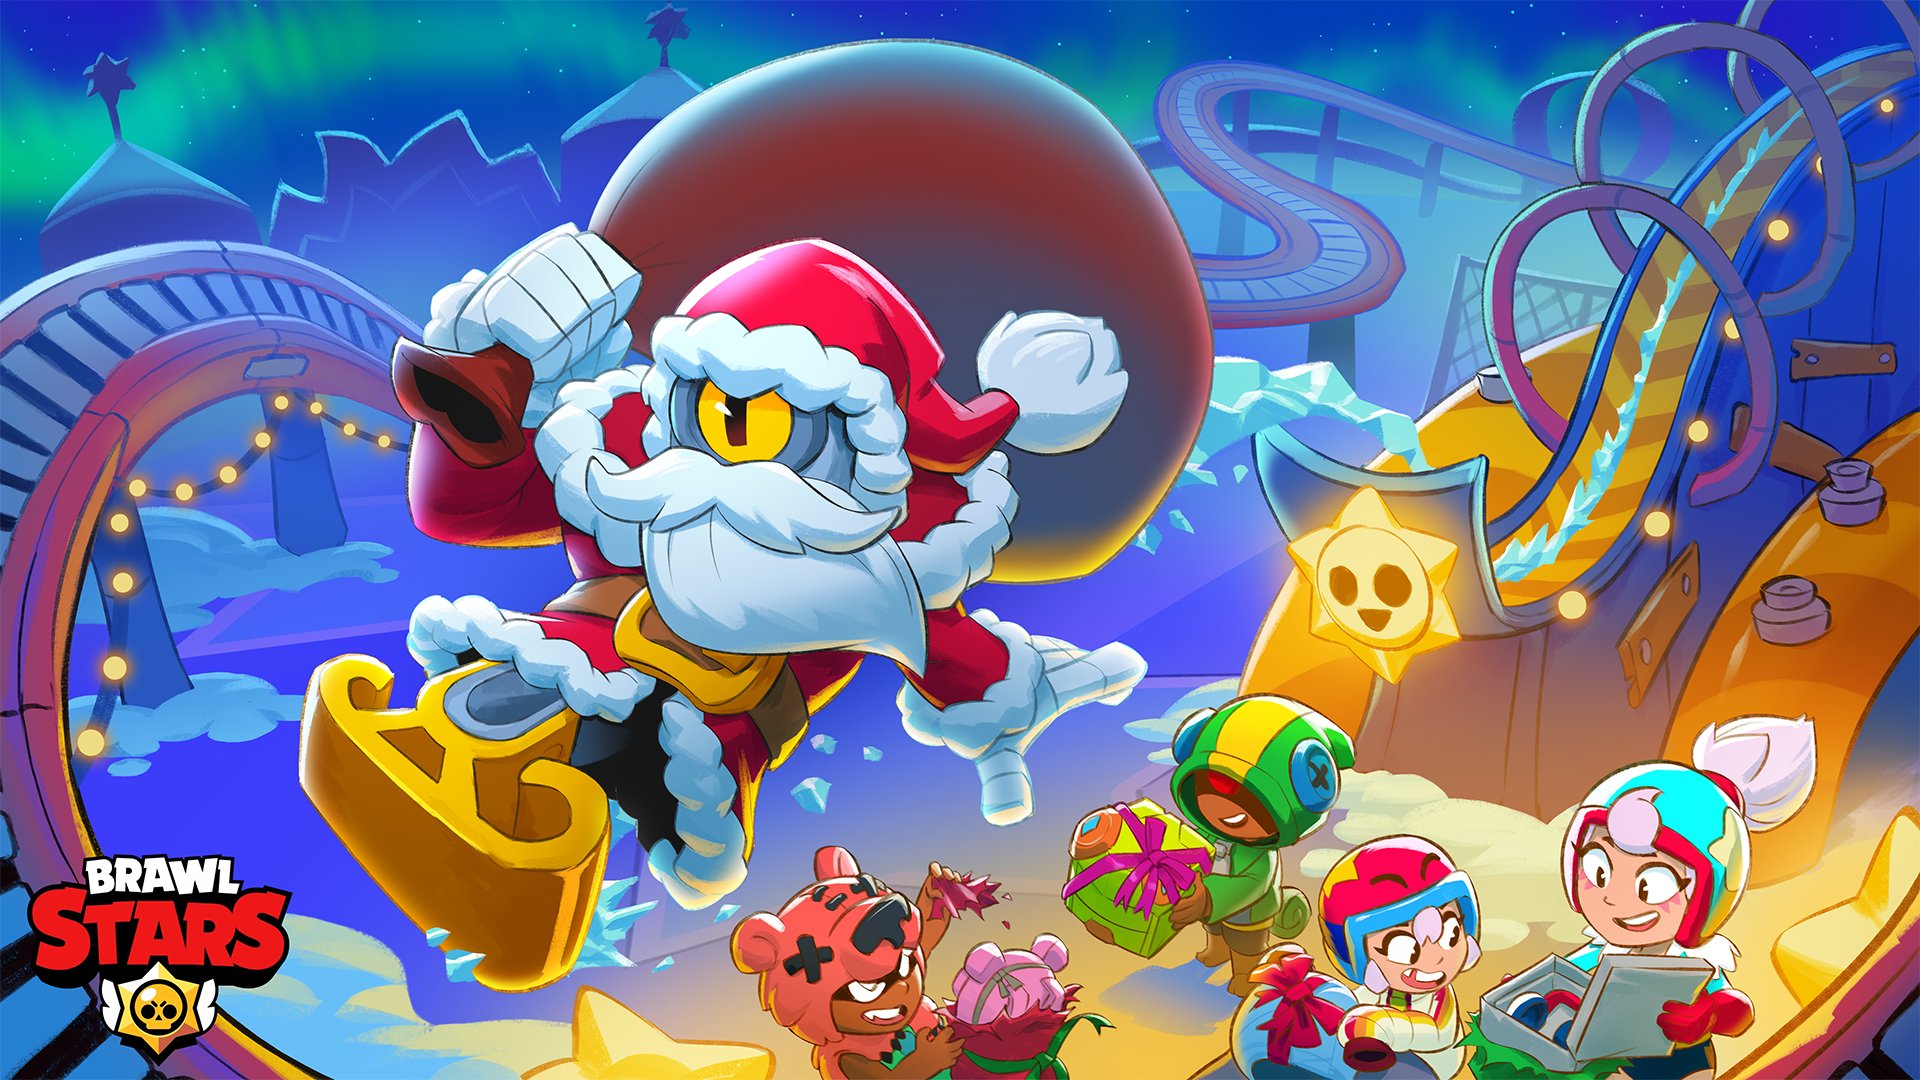 Brawl Stars on X: 🎅 Santa Stu is out and about delivering gifts